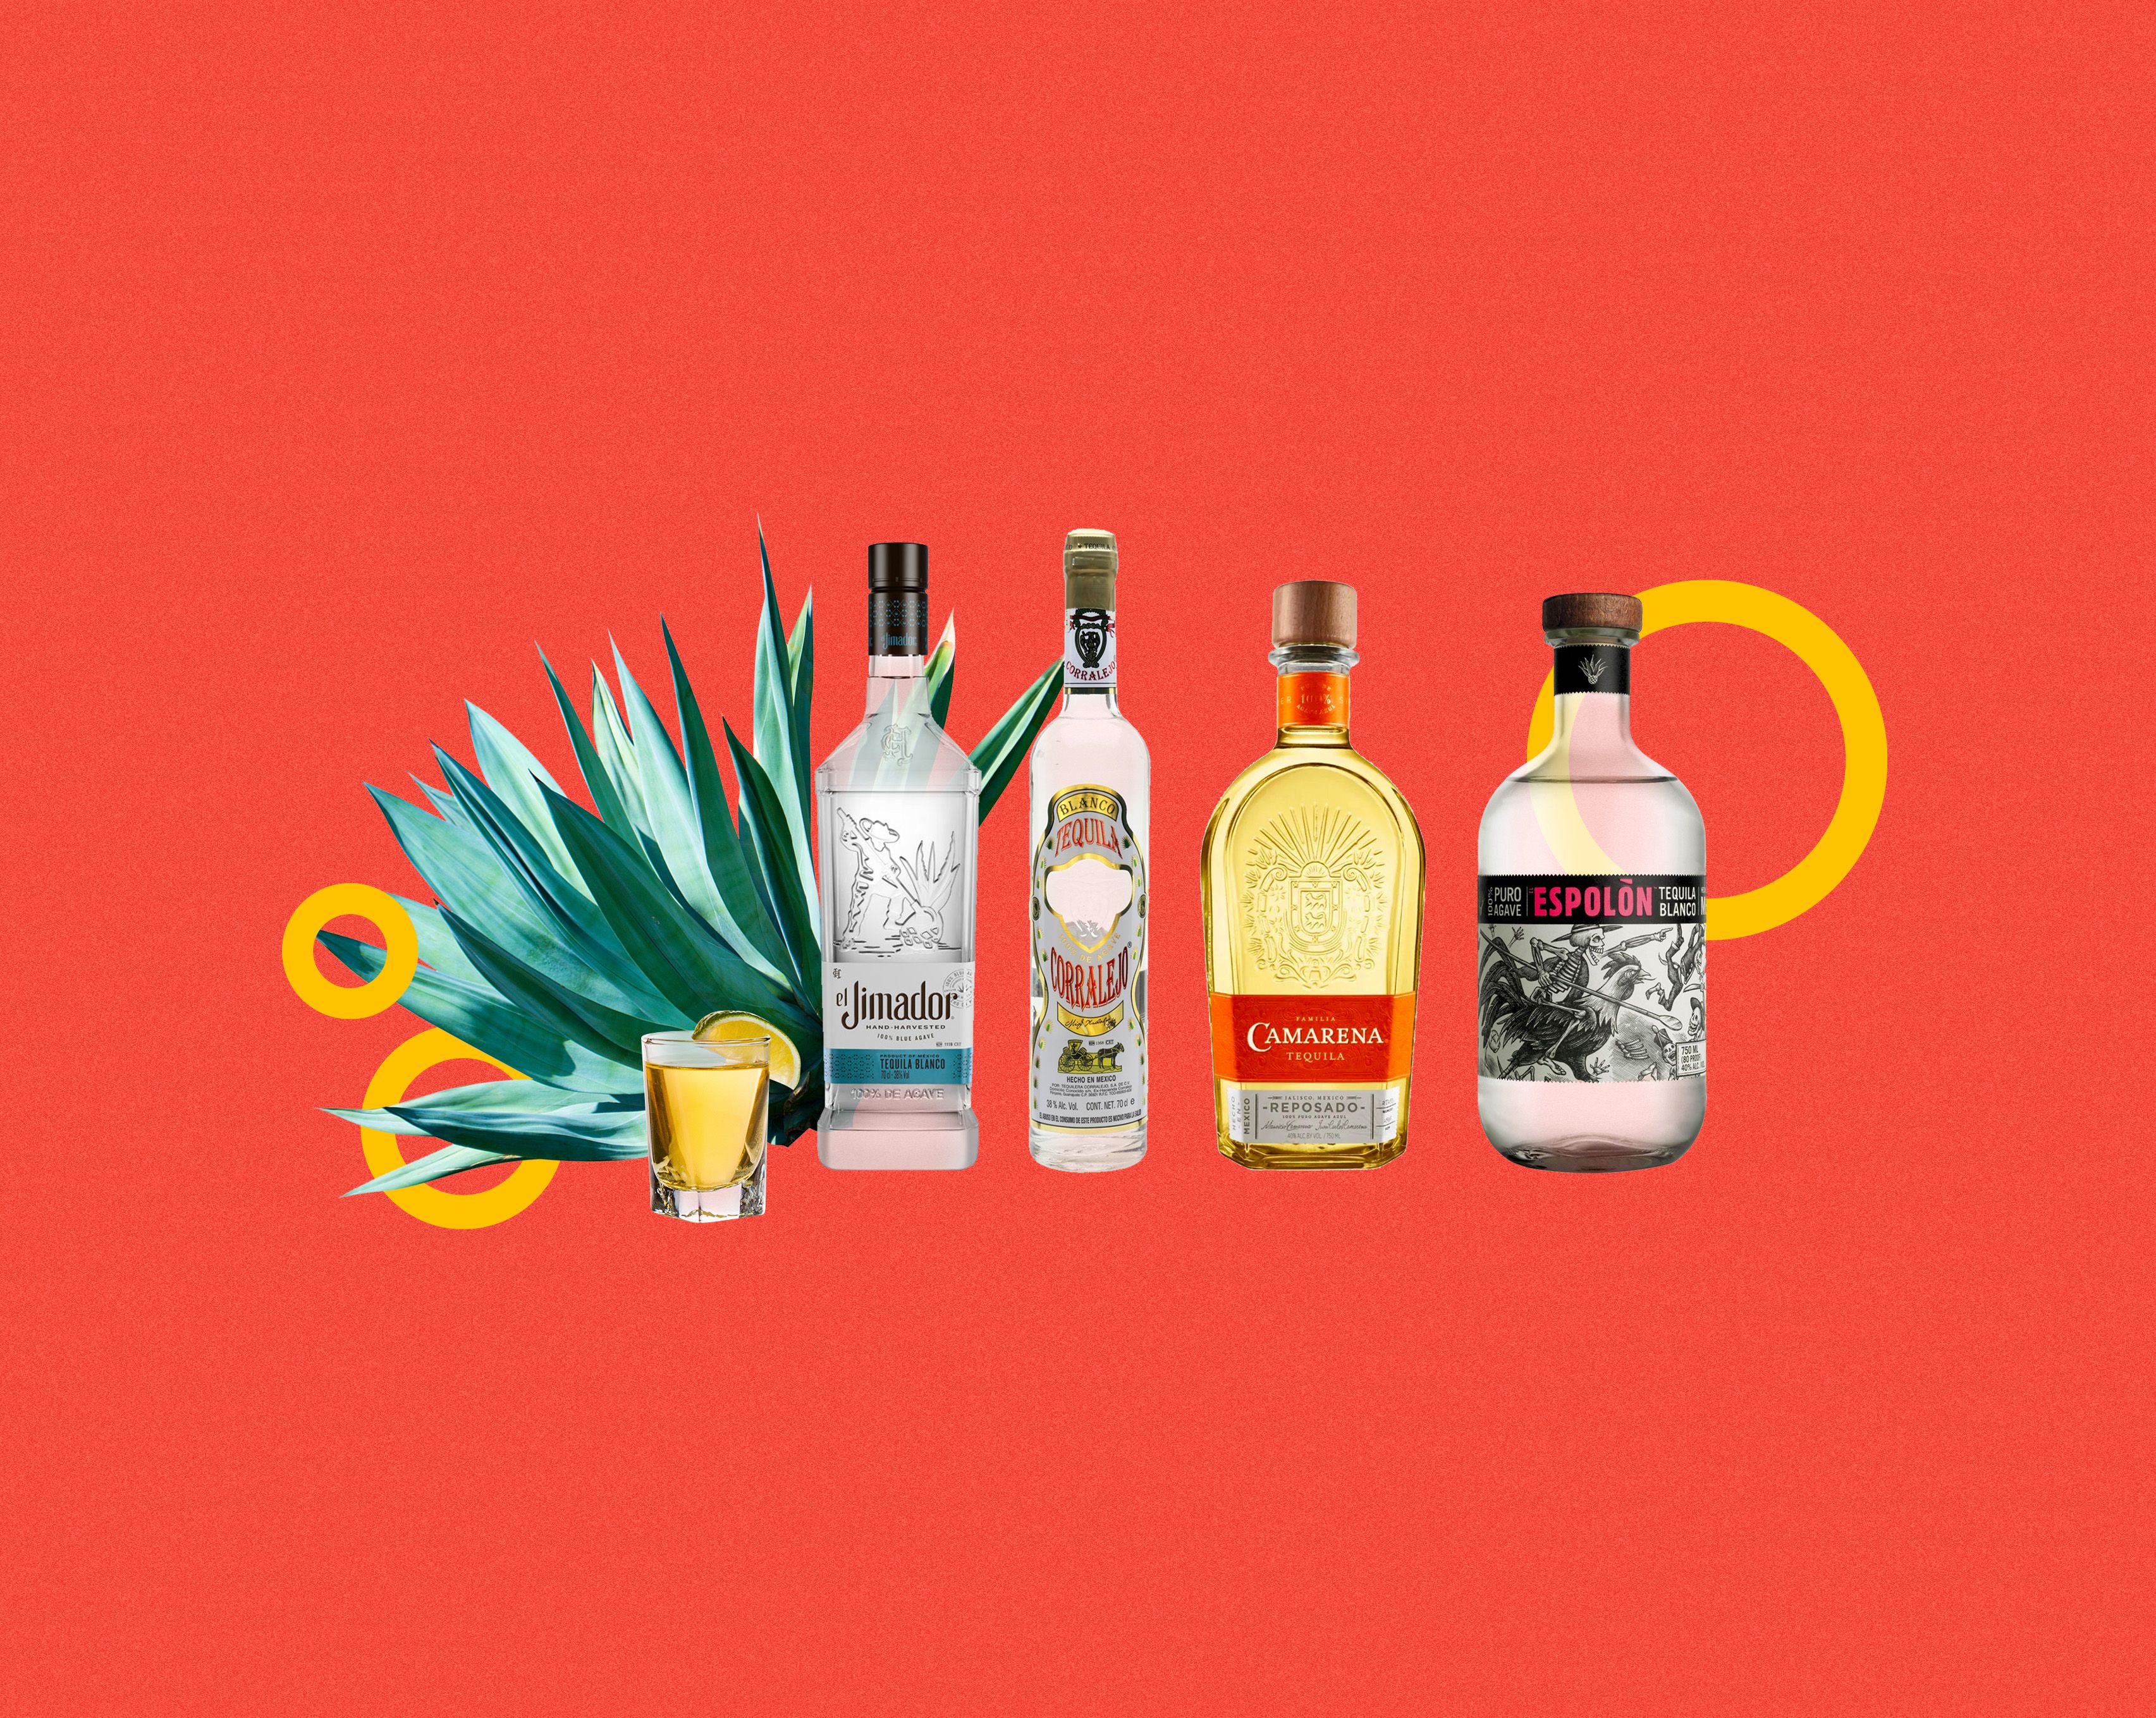 The 10 Best Cheap Tequilas to Drink in 2022